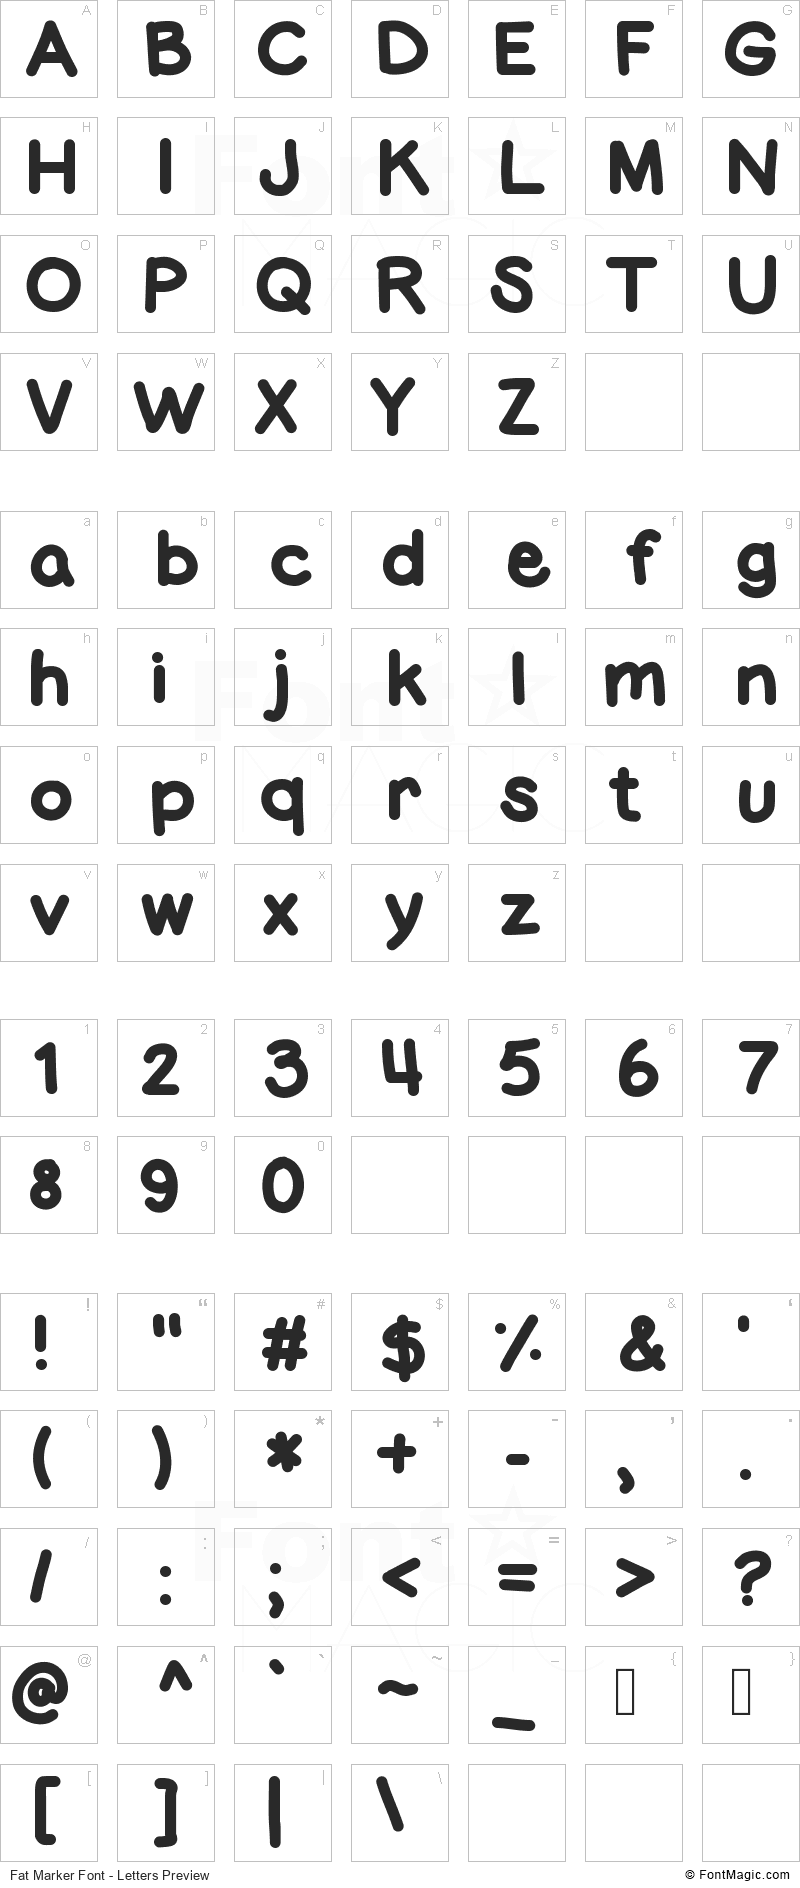 Fat Marker Font - All Latters Preview Chart